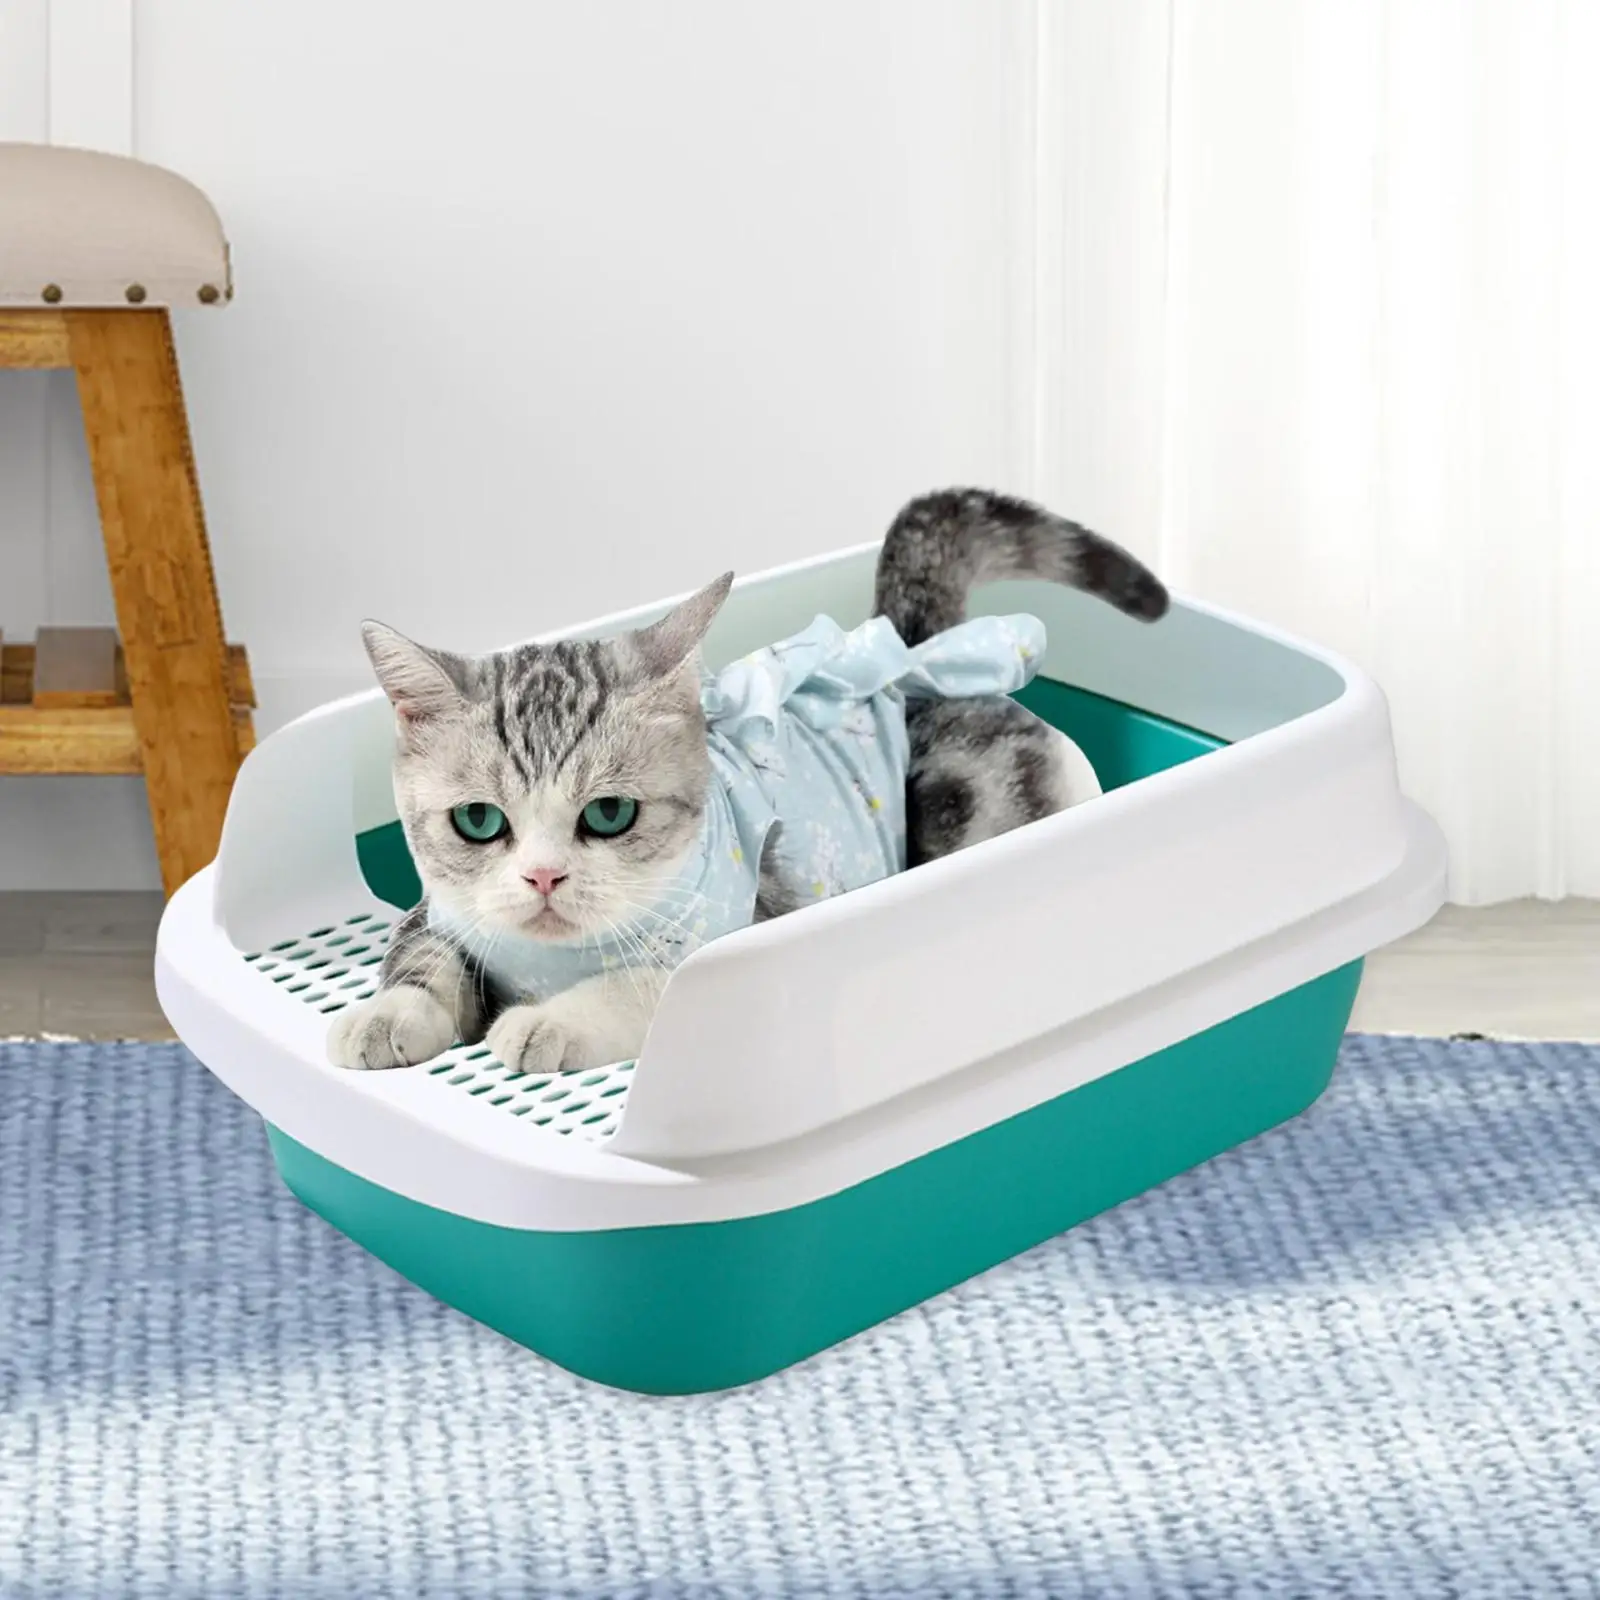 Cat Potty Toilet Portable Removable Splashproof Large Semi Closed Bedpan Easy to Clean for Indoor Cats Sand Box Container